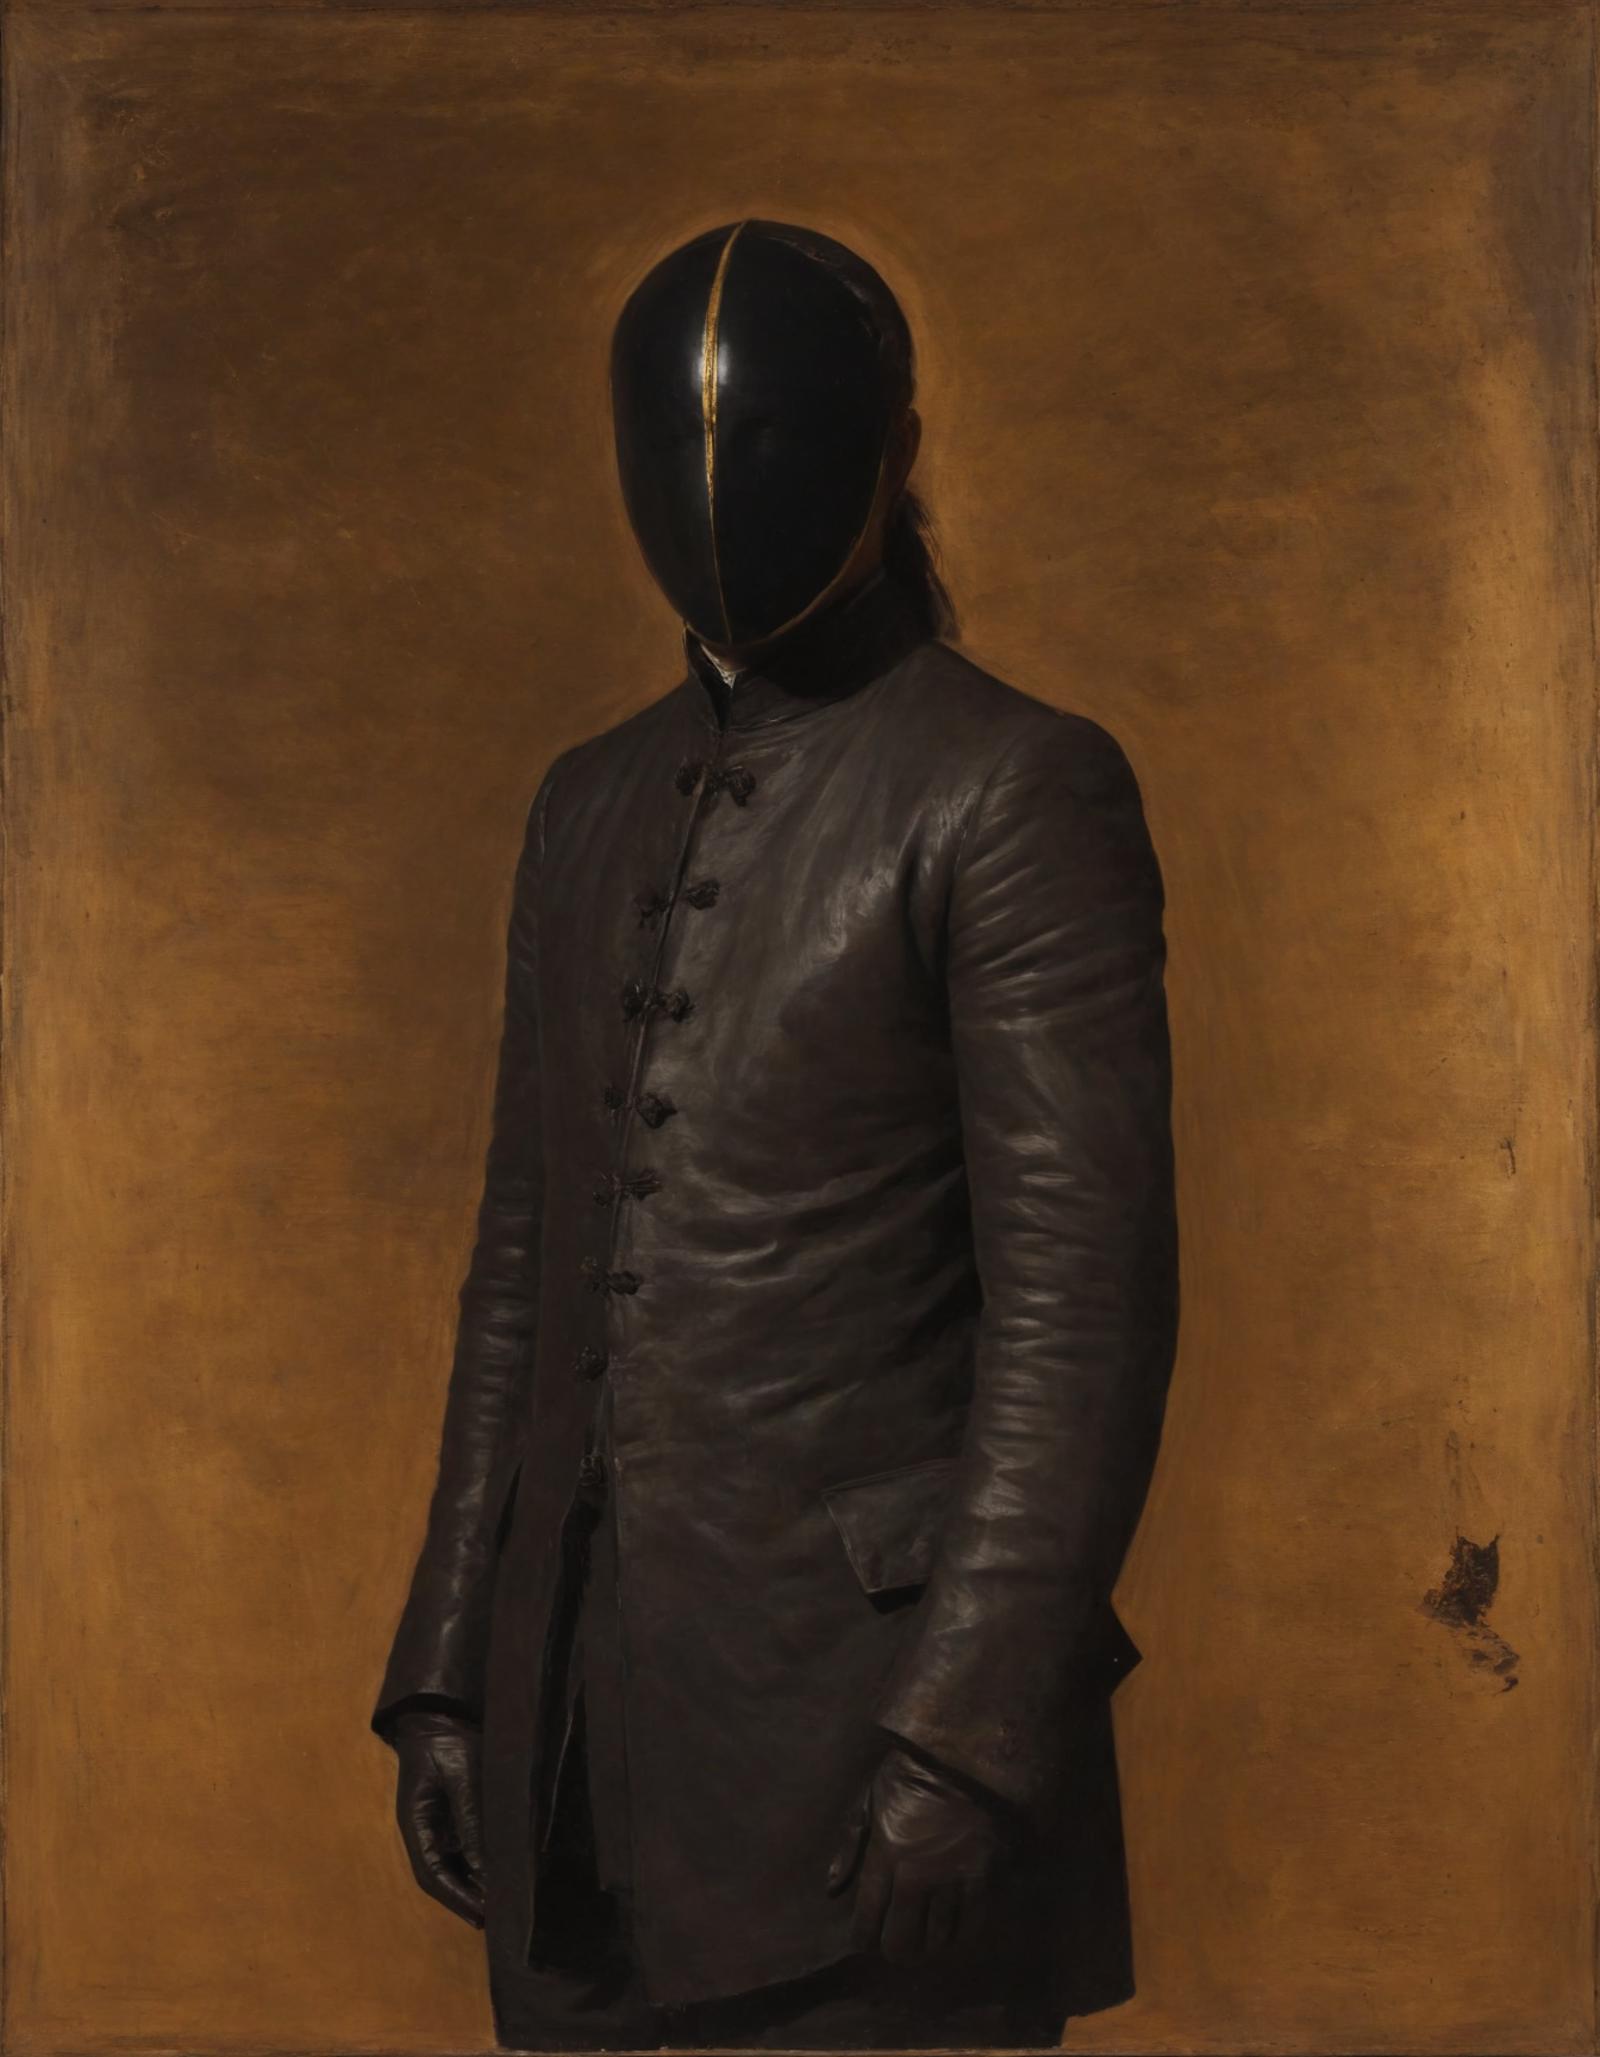 A person in a leather jacket and mask standing in a yellow room.